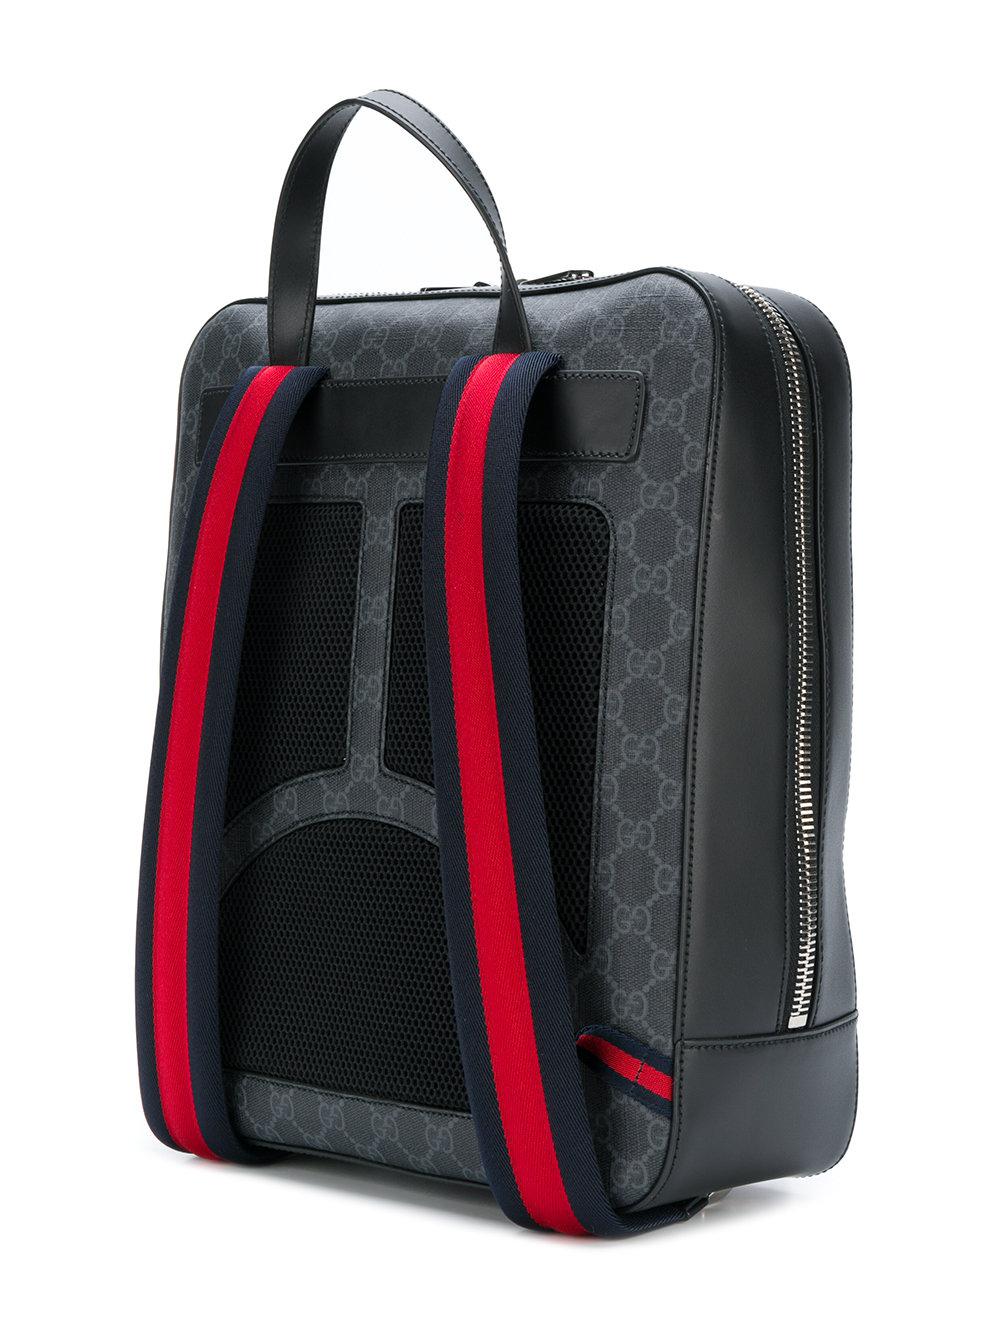 Gucci Canvas Gg Supreme Night Courier Backpack in Black for Men - Lyst